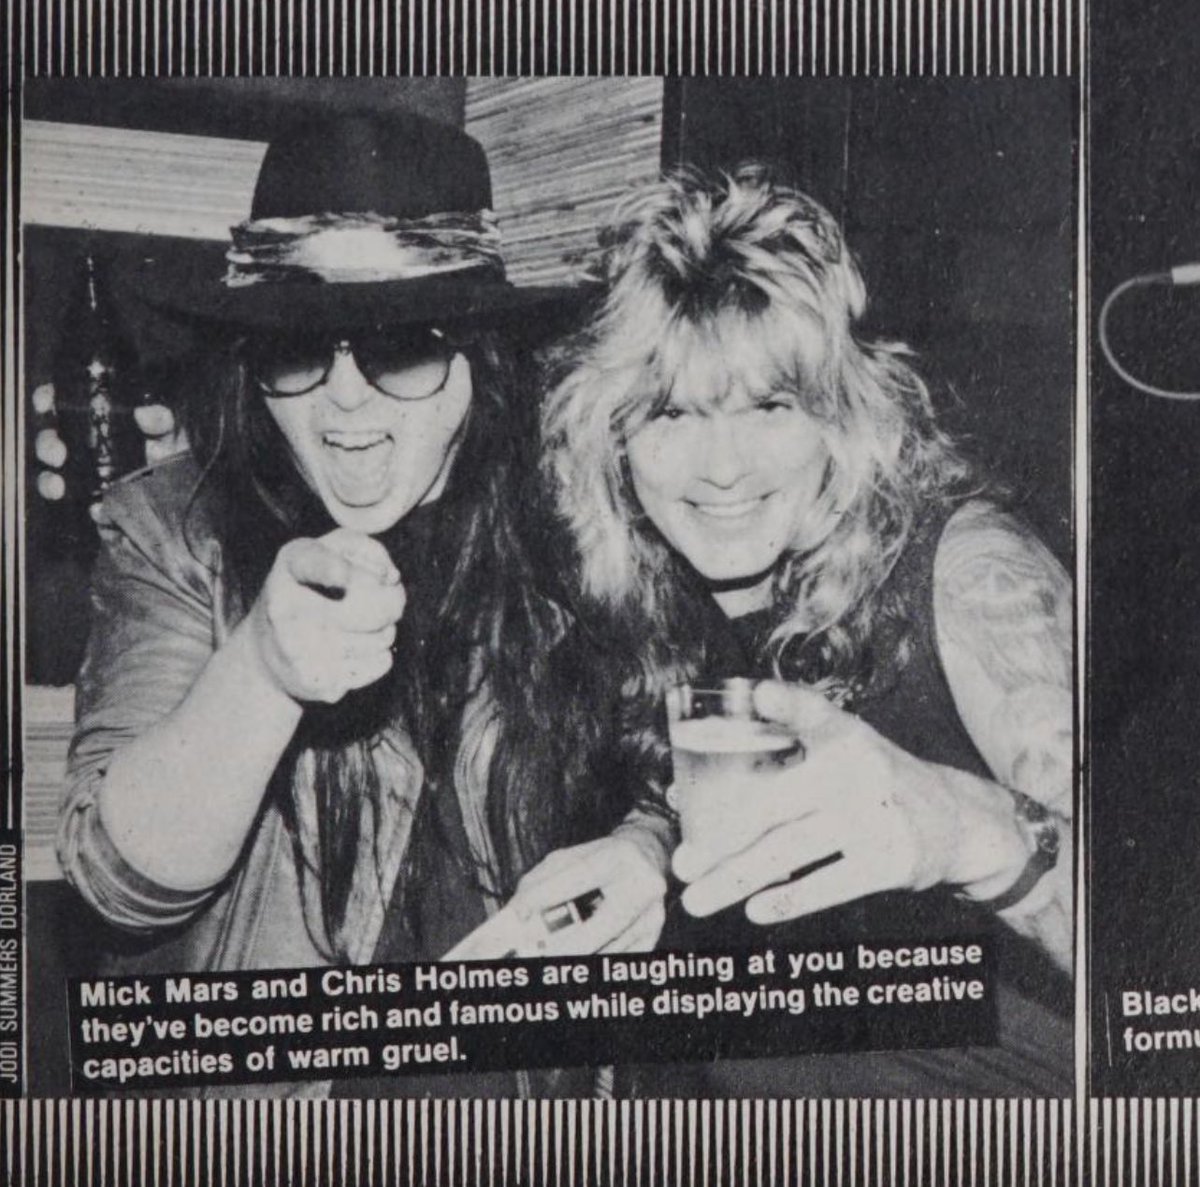 Mick Mars and Chris Holmes from WASP